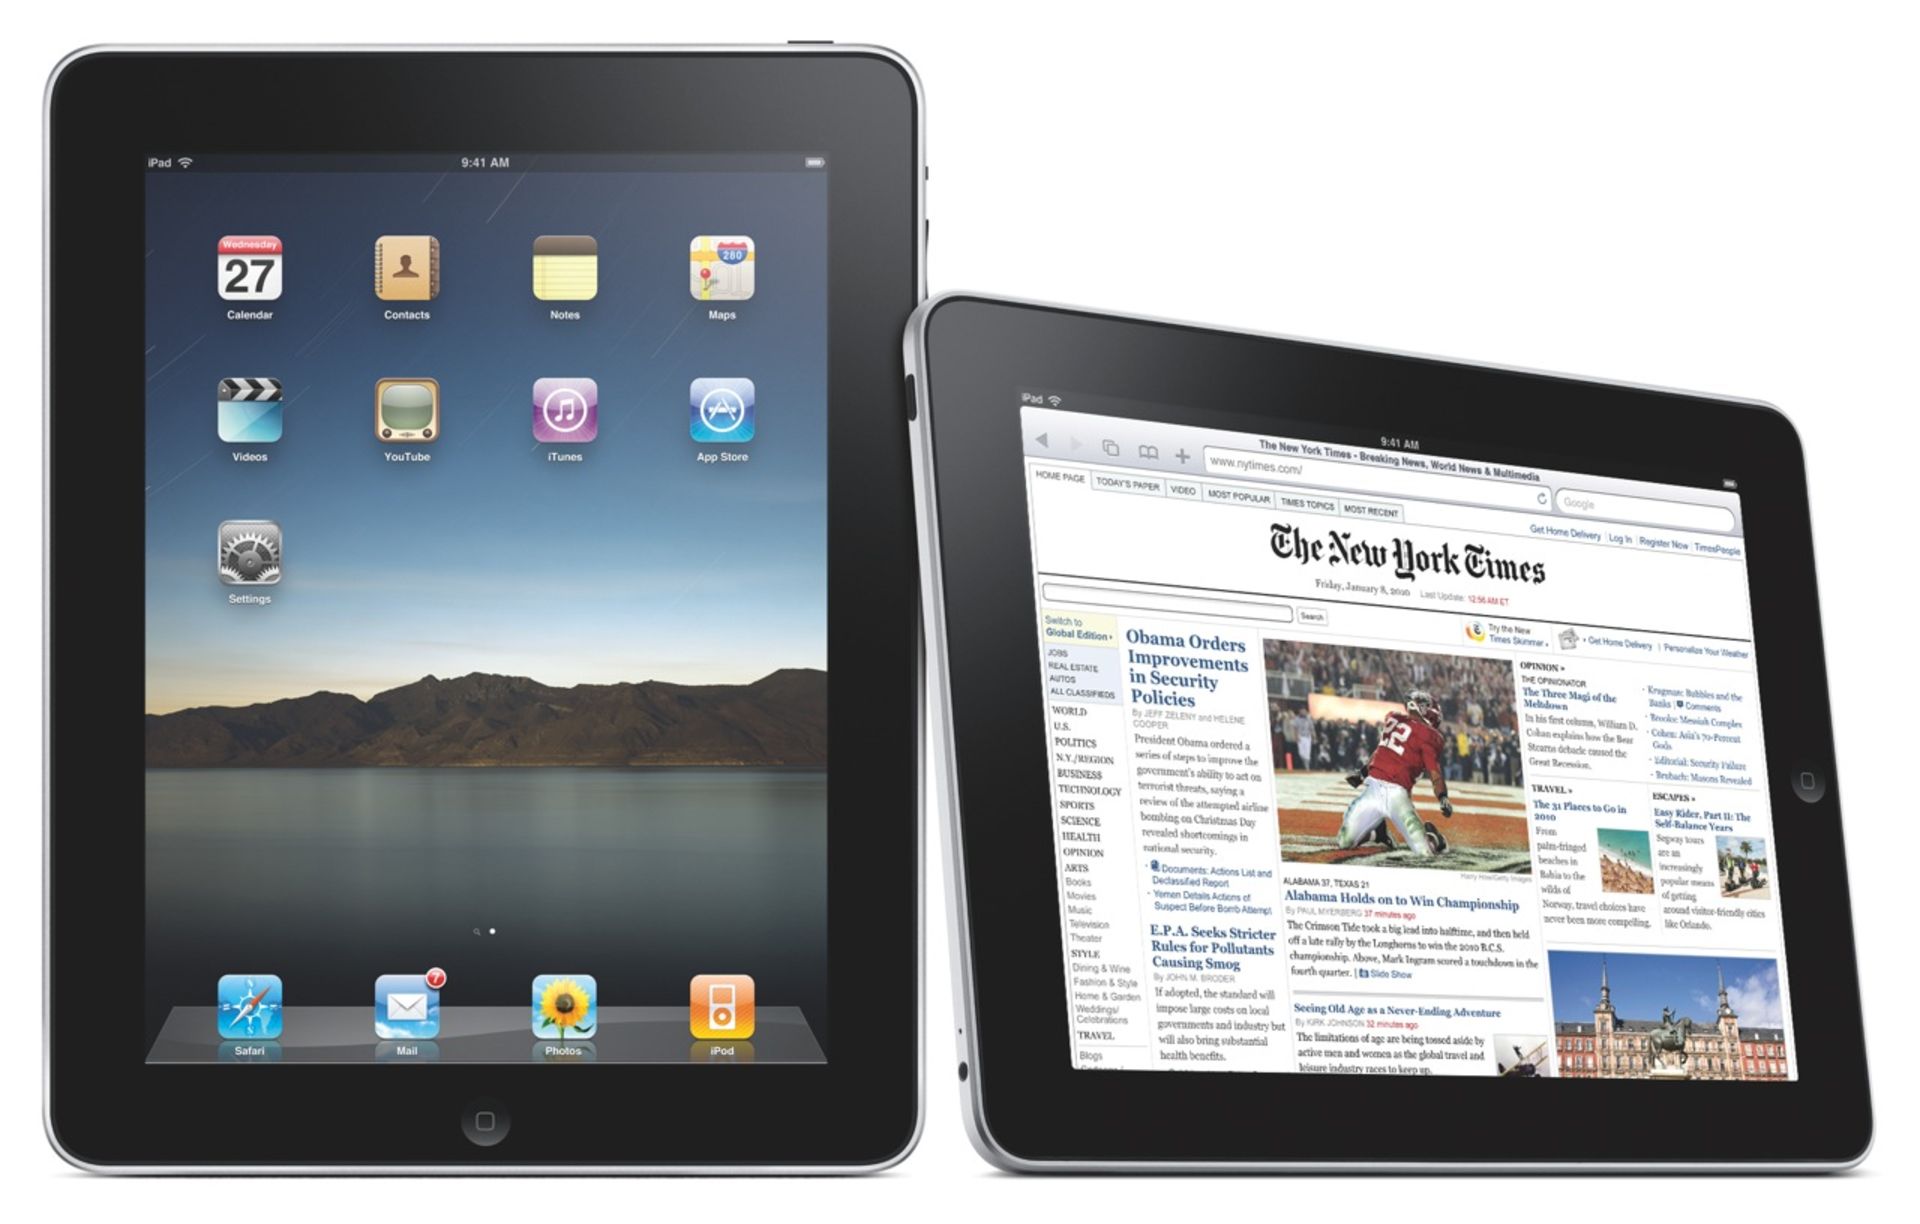 V Grade U Apple IPad 16 GB Wi-Fi (Units Only) X 2 YOUR BID PRICE TO BE MULTIPLIED BY TWO